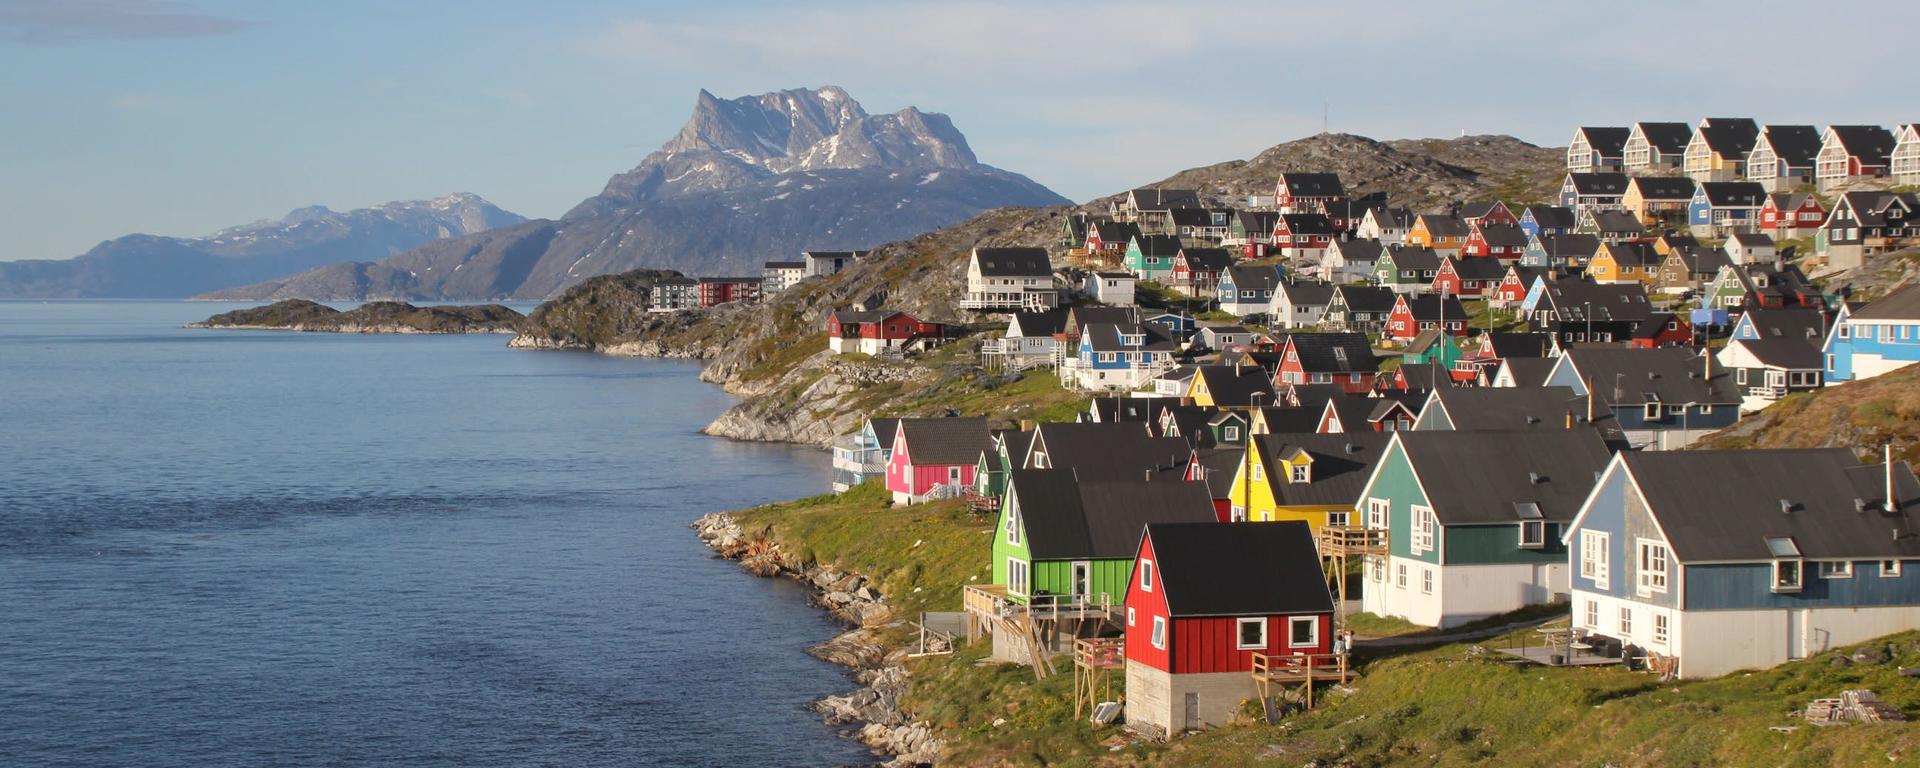 Nuuk coastline with mountain in background